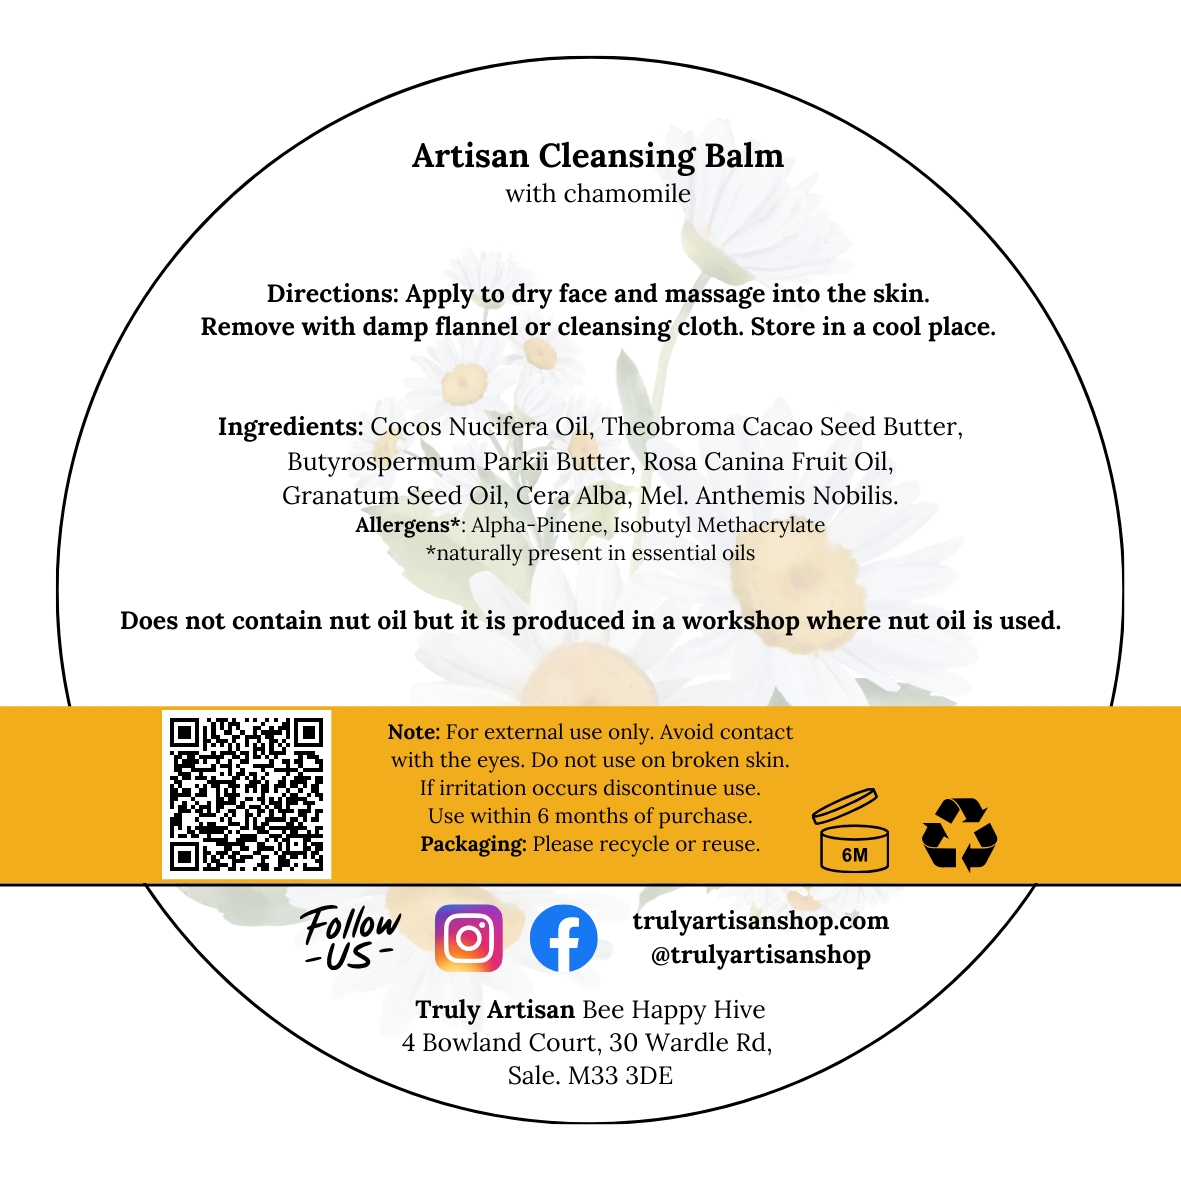 Chamomile Cleansing Balm